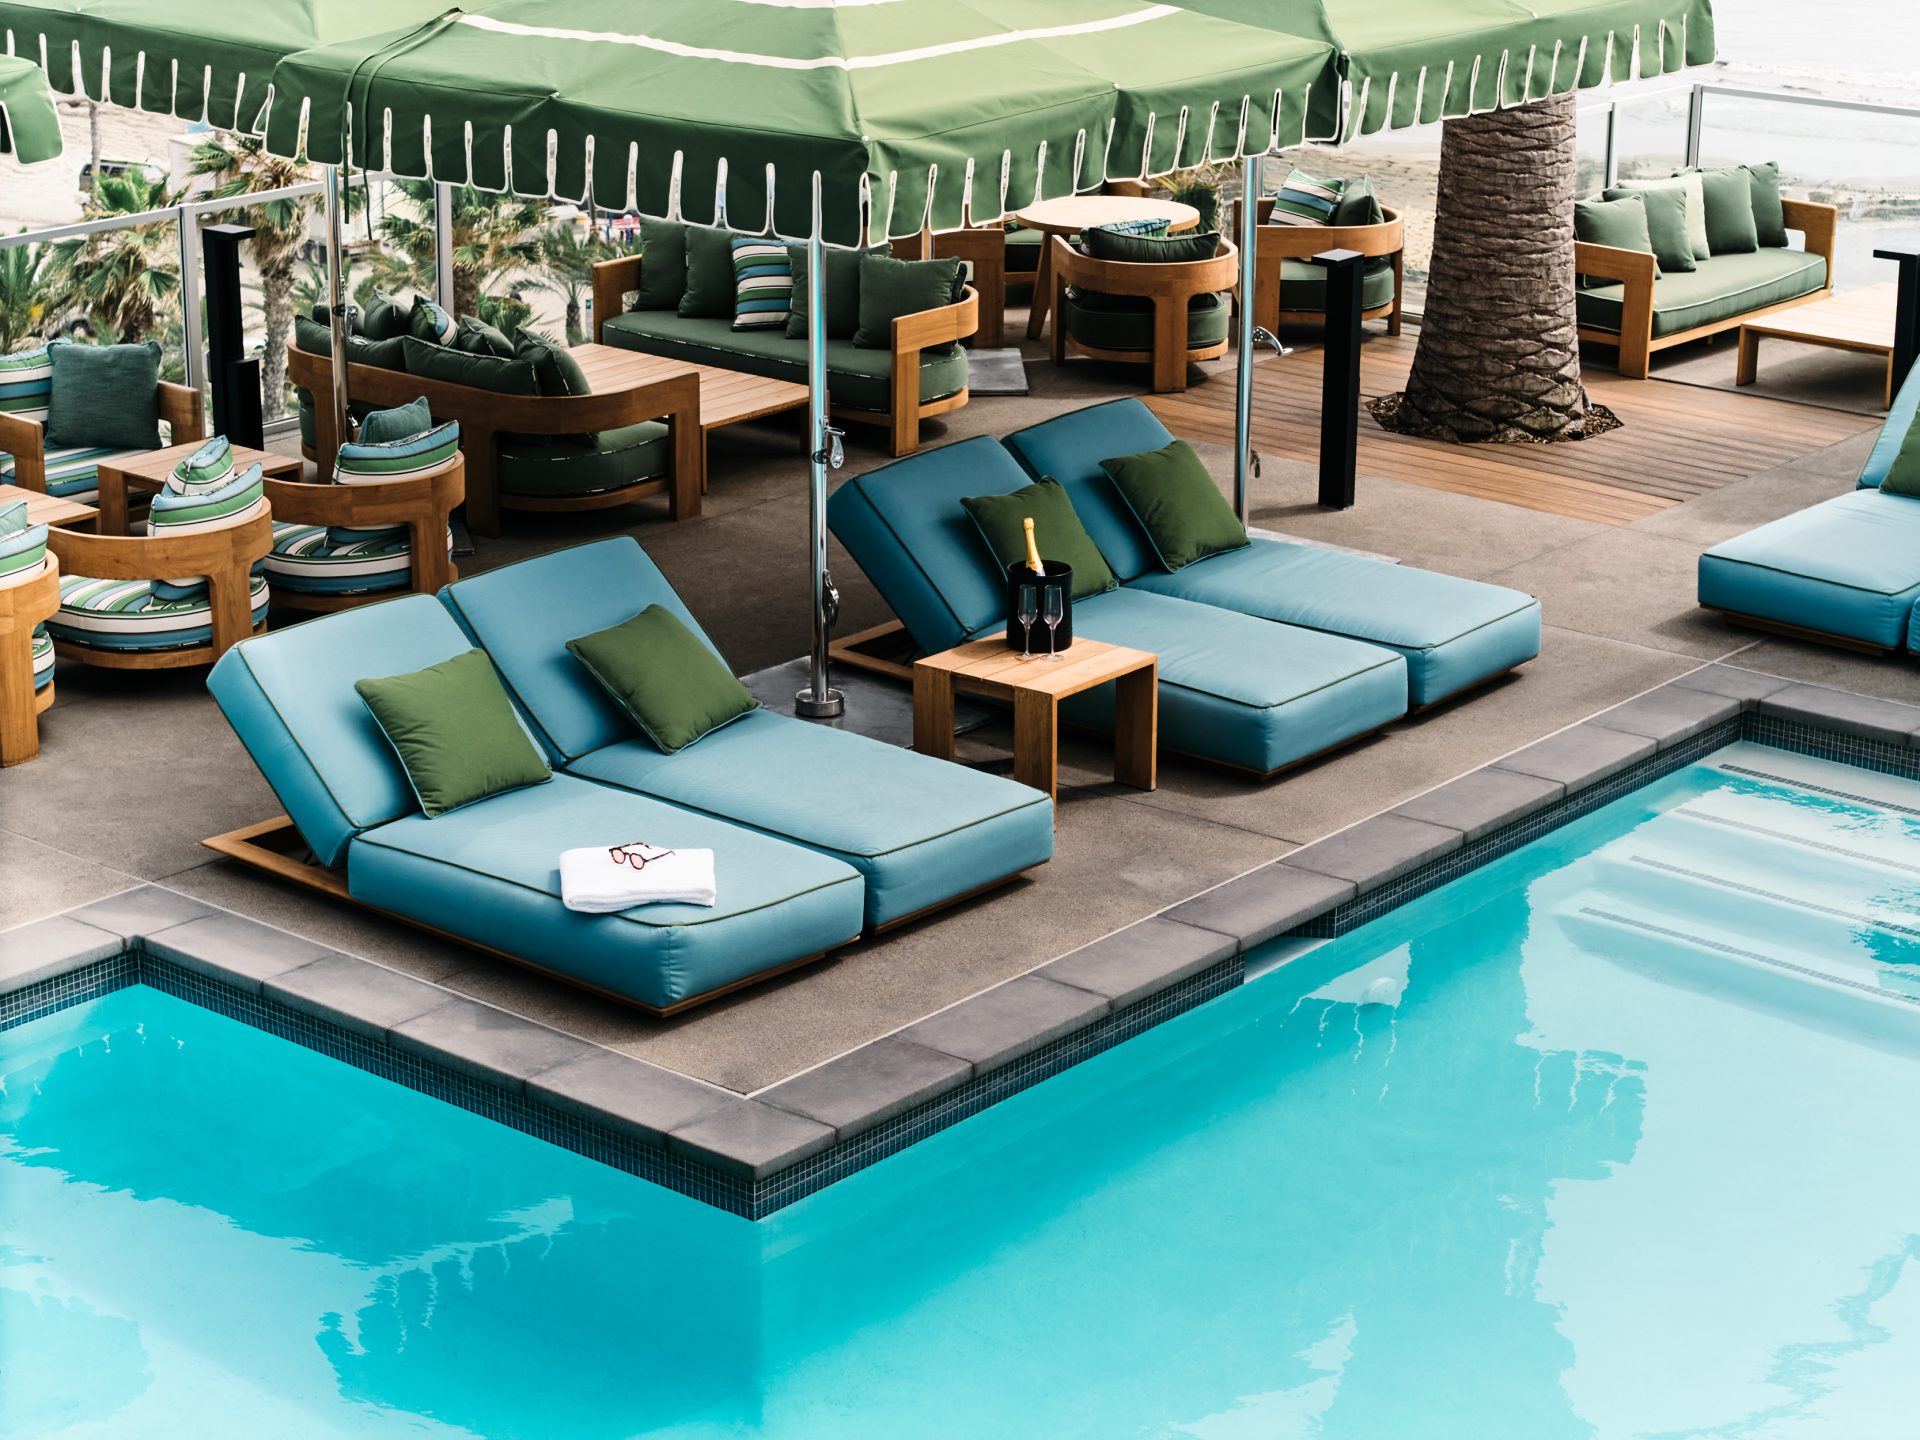 Lounge chairs and umbrellas next to pool